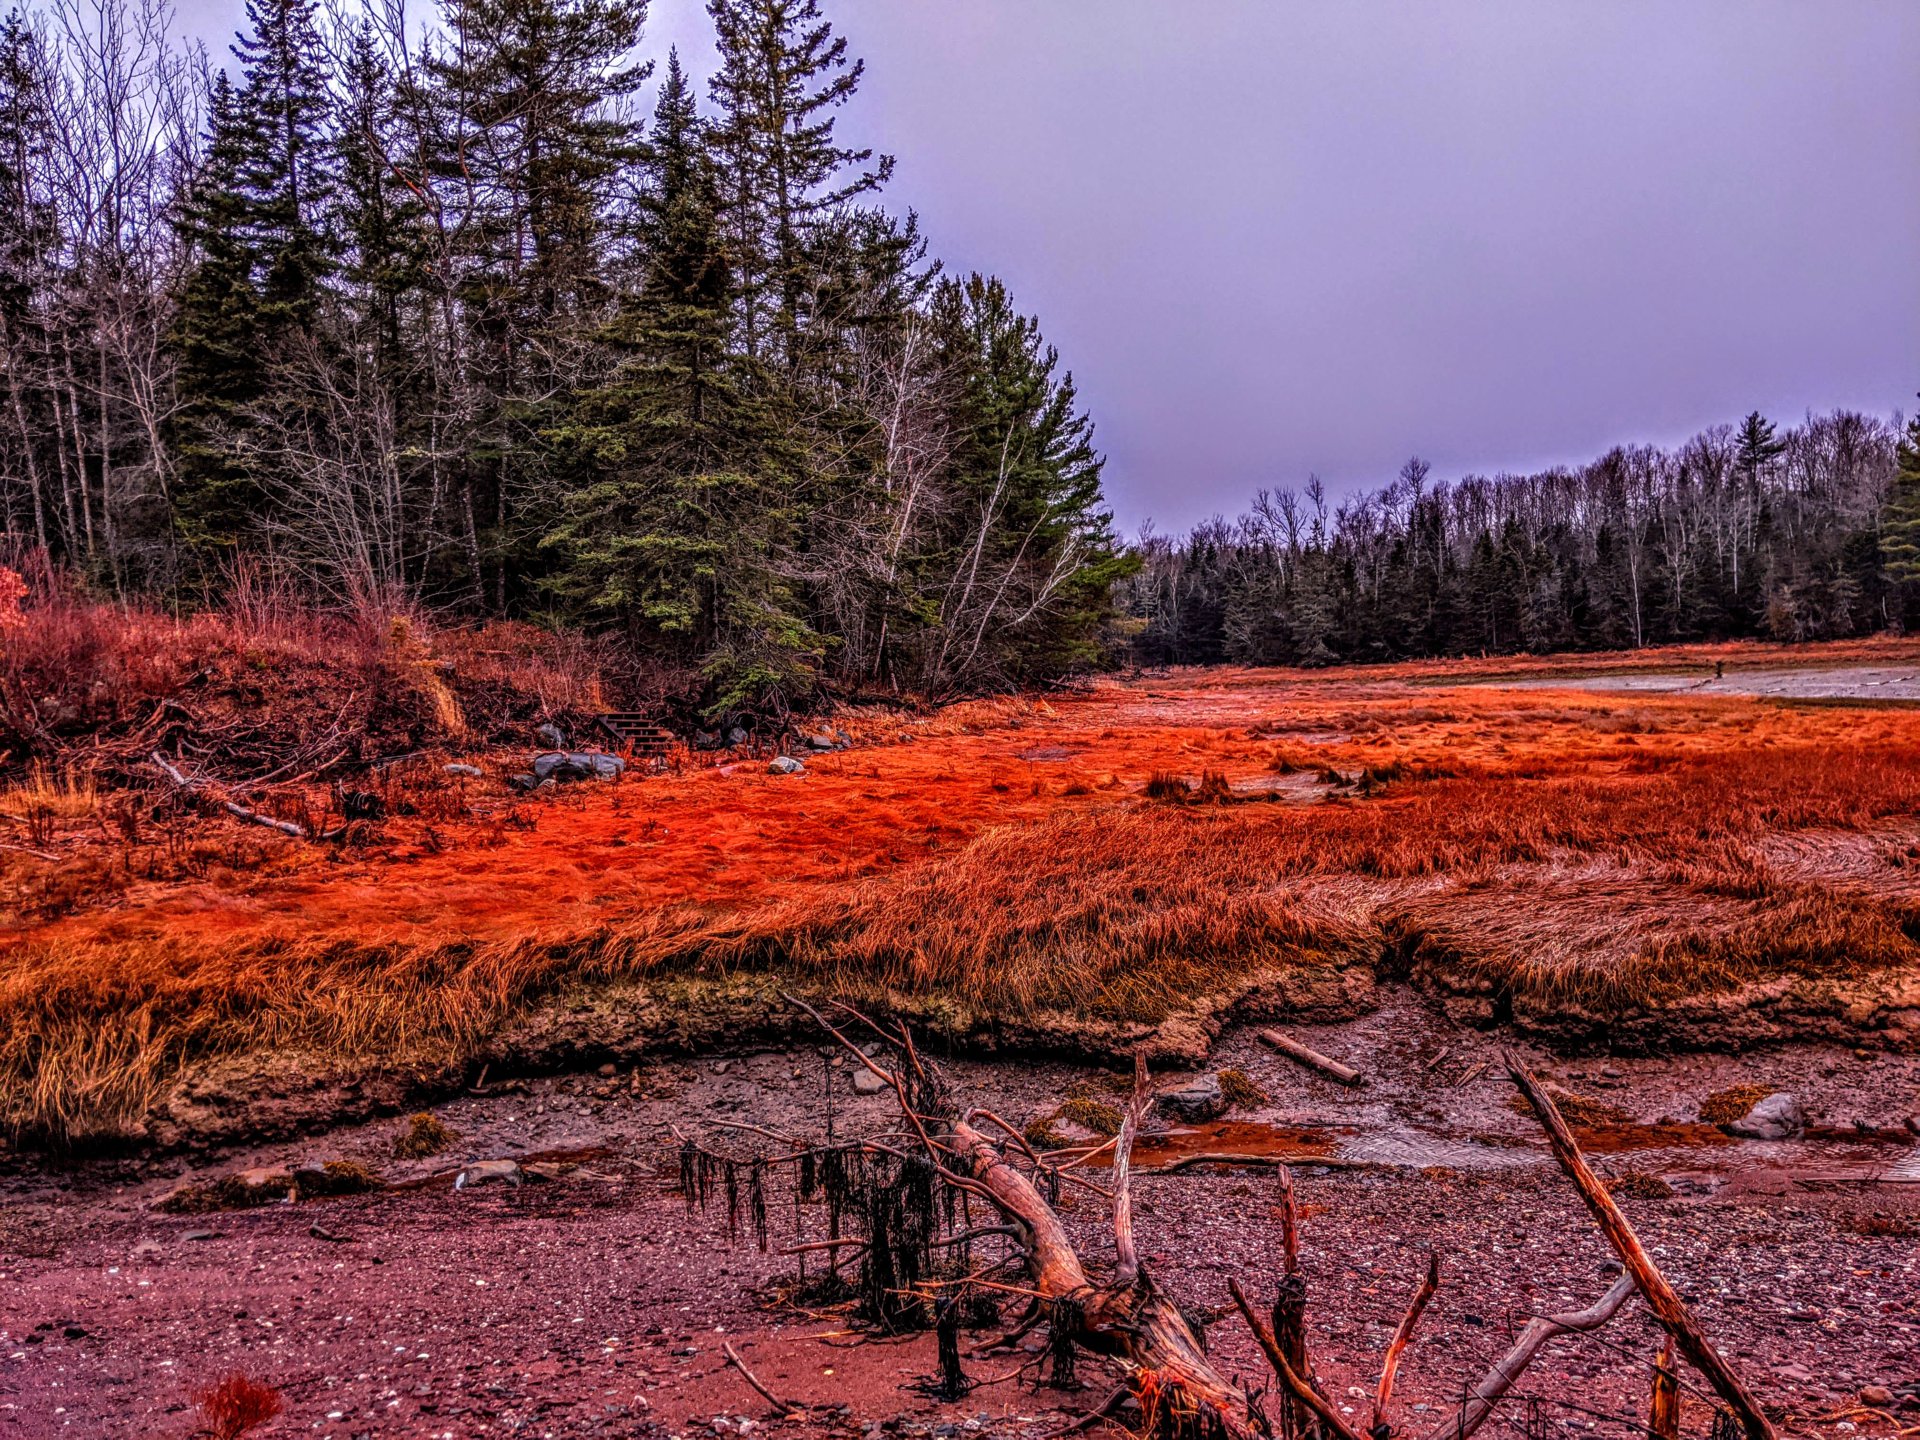 Nov 23, 2020 Lewis Cove Perry Maine red grass on the ocean bay